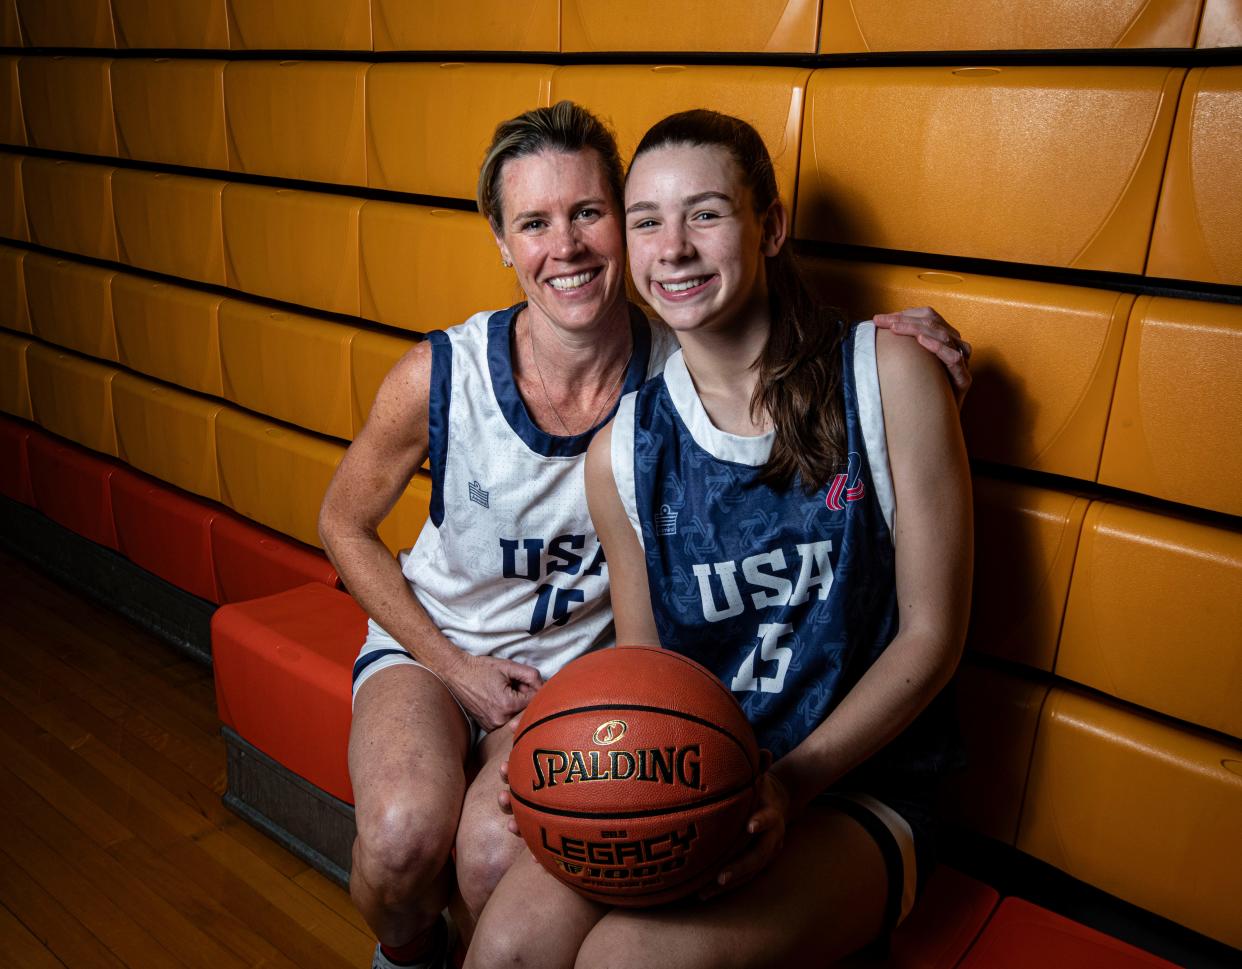 Carolyn Dorfman of Mamaroneck and her daughter Addison, 15, both won medals in basketball at the Maccabi Pan-Am Games in Argentina over the holidays. Carolyn played on the USA open team, and Addison played on the USA U18 team. When countries pulled out over security concerns, Addison's team was forced to play against adult teams, including playing against her mother. They were photographed at Mamaroneck High School Jan. 15, 2024.